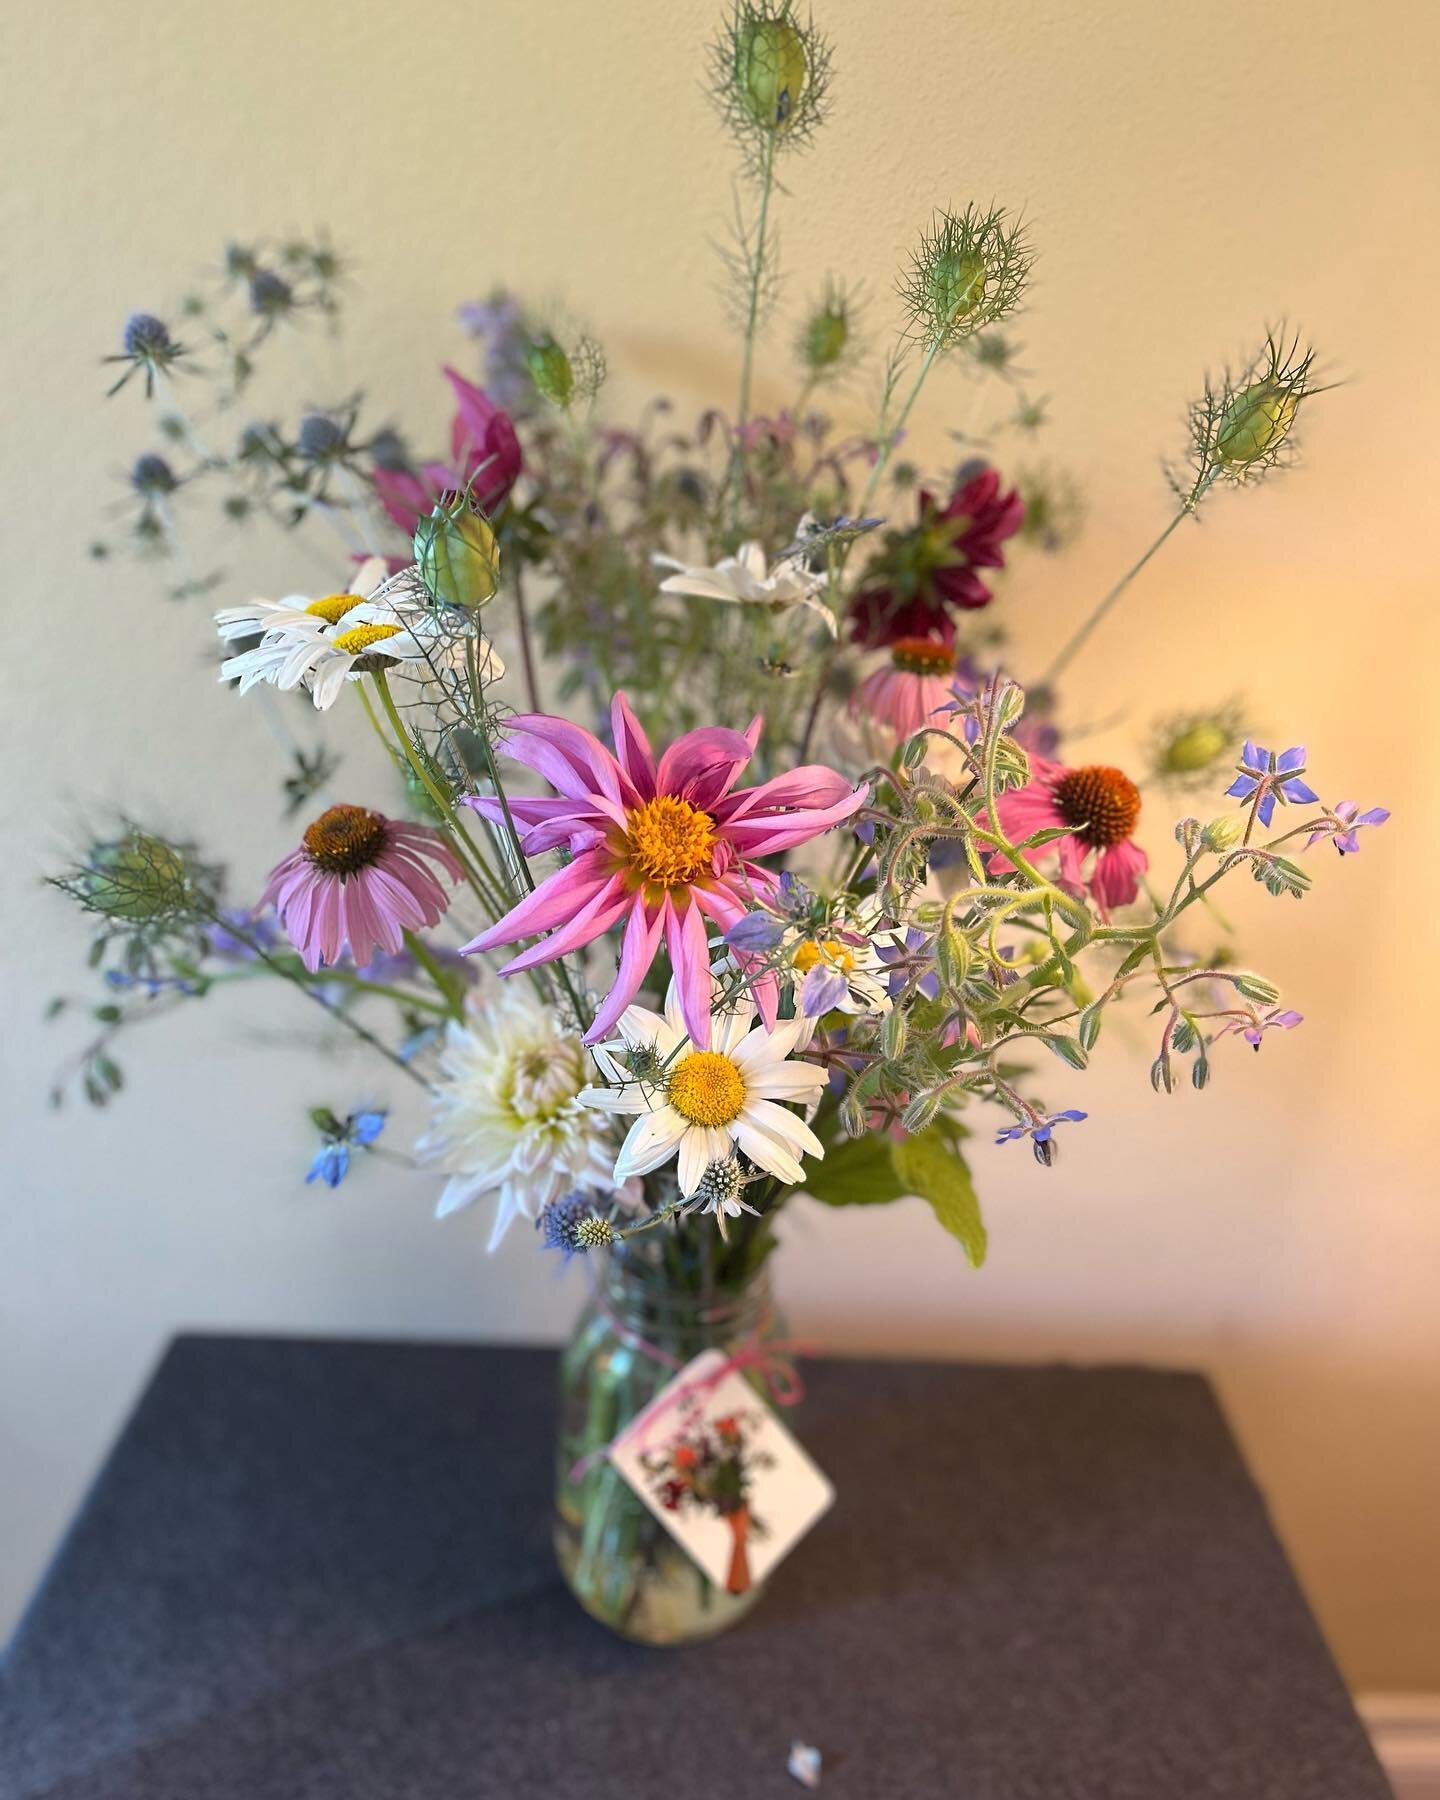 in love with this sparky little bouquet I made as a backup for the 47th Ave farm csa sample. You know how sometimes things grow on you? The textures and colors here have sort of started to settle in together. Maybe it&rsquo;s because those blue borag